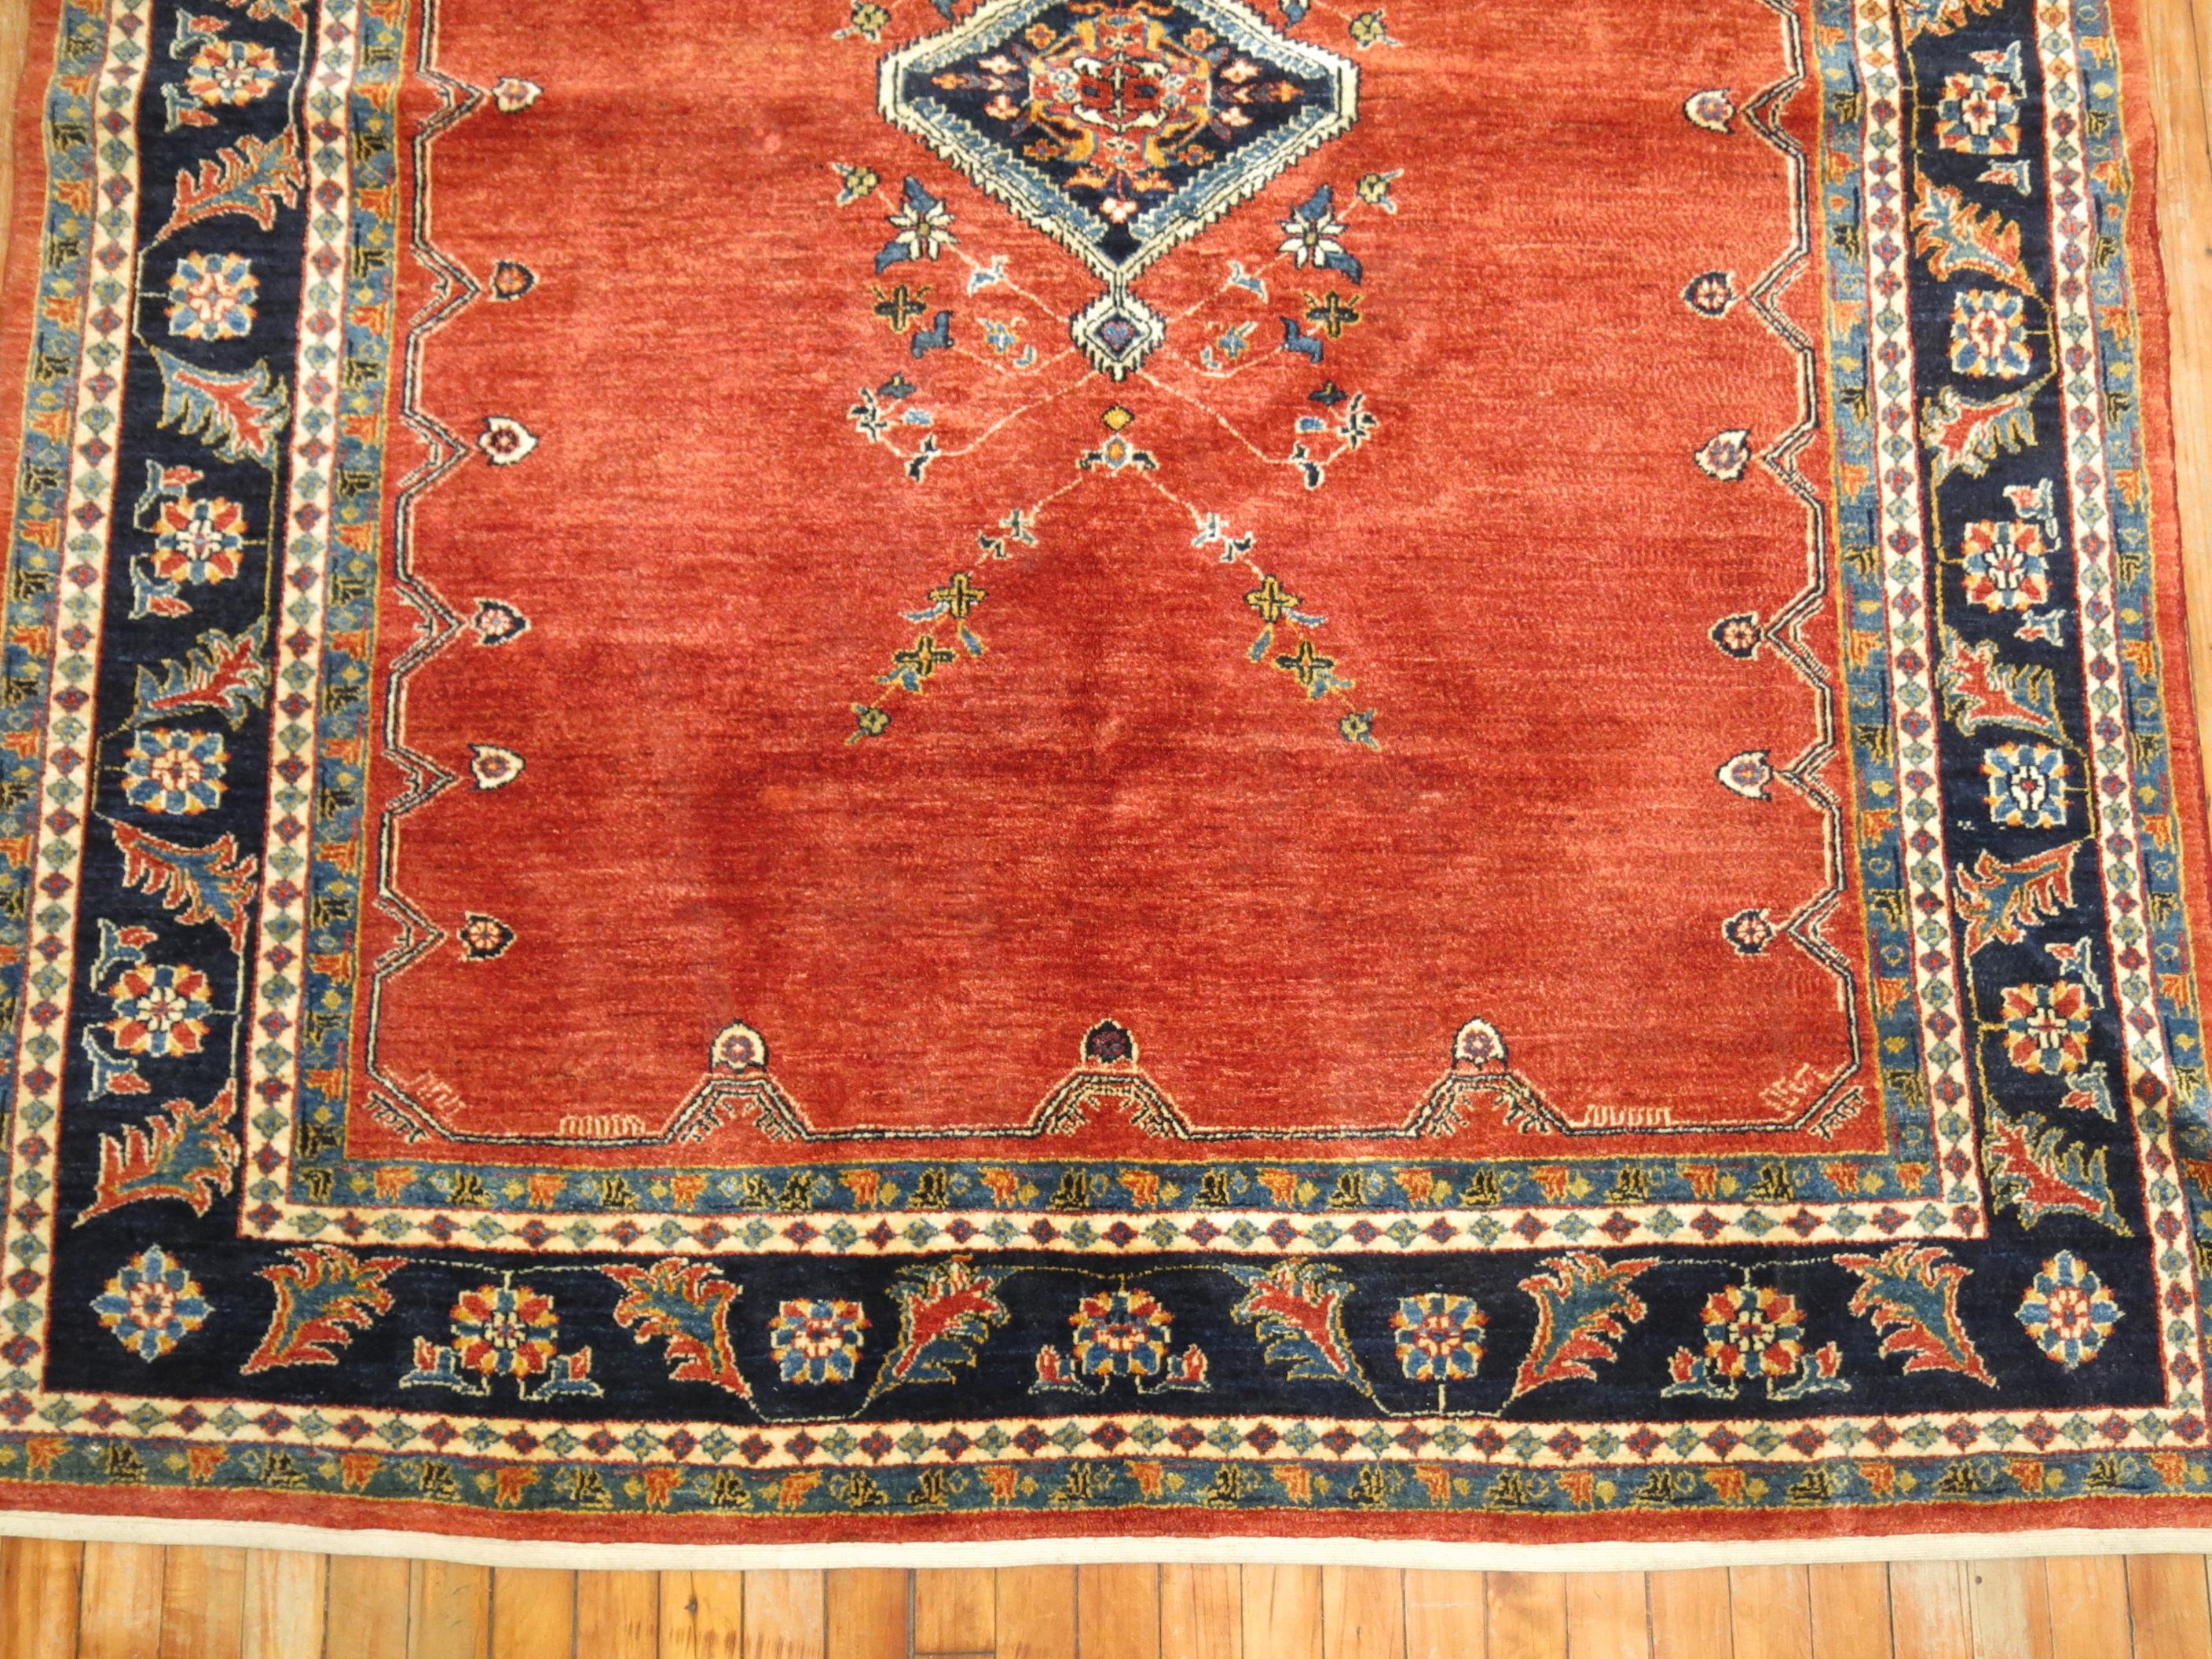 A 21st century Persian Bidjar rug woven with 100 % hand-spun vegetable dyed wool derived from a design and colors of an early 20th century Persian Sarouk Ferehan Rug. Measures 5'7'' x 7'2''

Bidjar carpets are world renowned for their superb